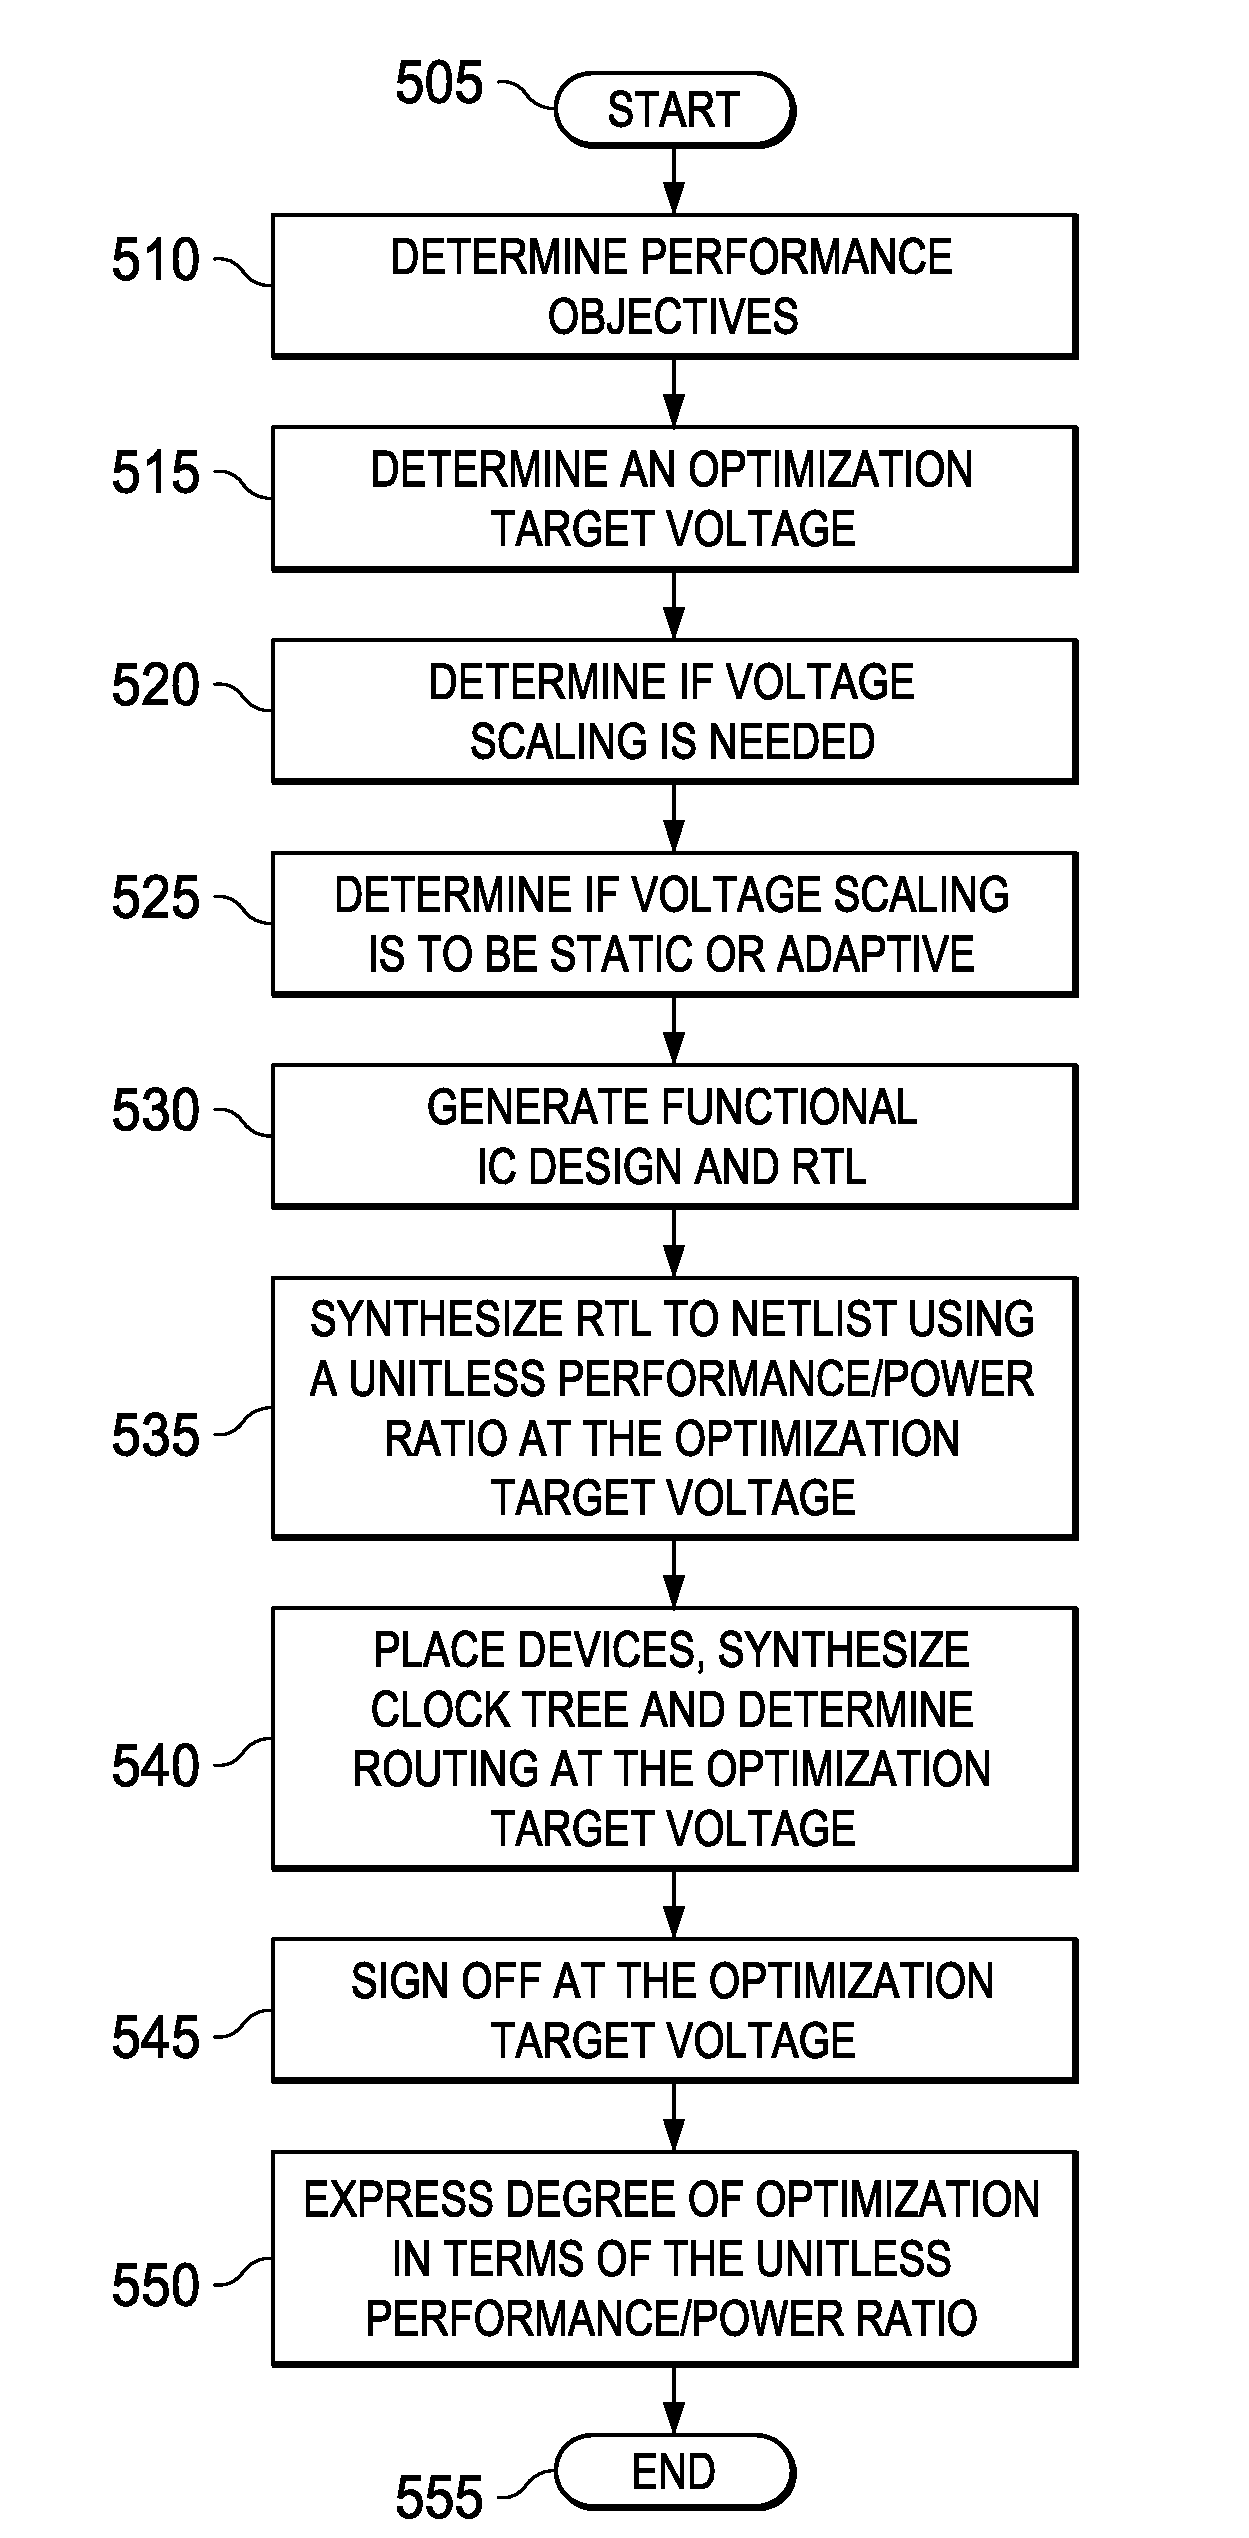 Systematic, normalized metric for analyzing and comparing optimization techniques for integrated circuits employing voltage scaling and integrated circuits designed thereby